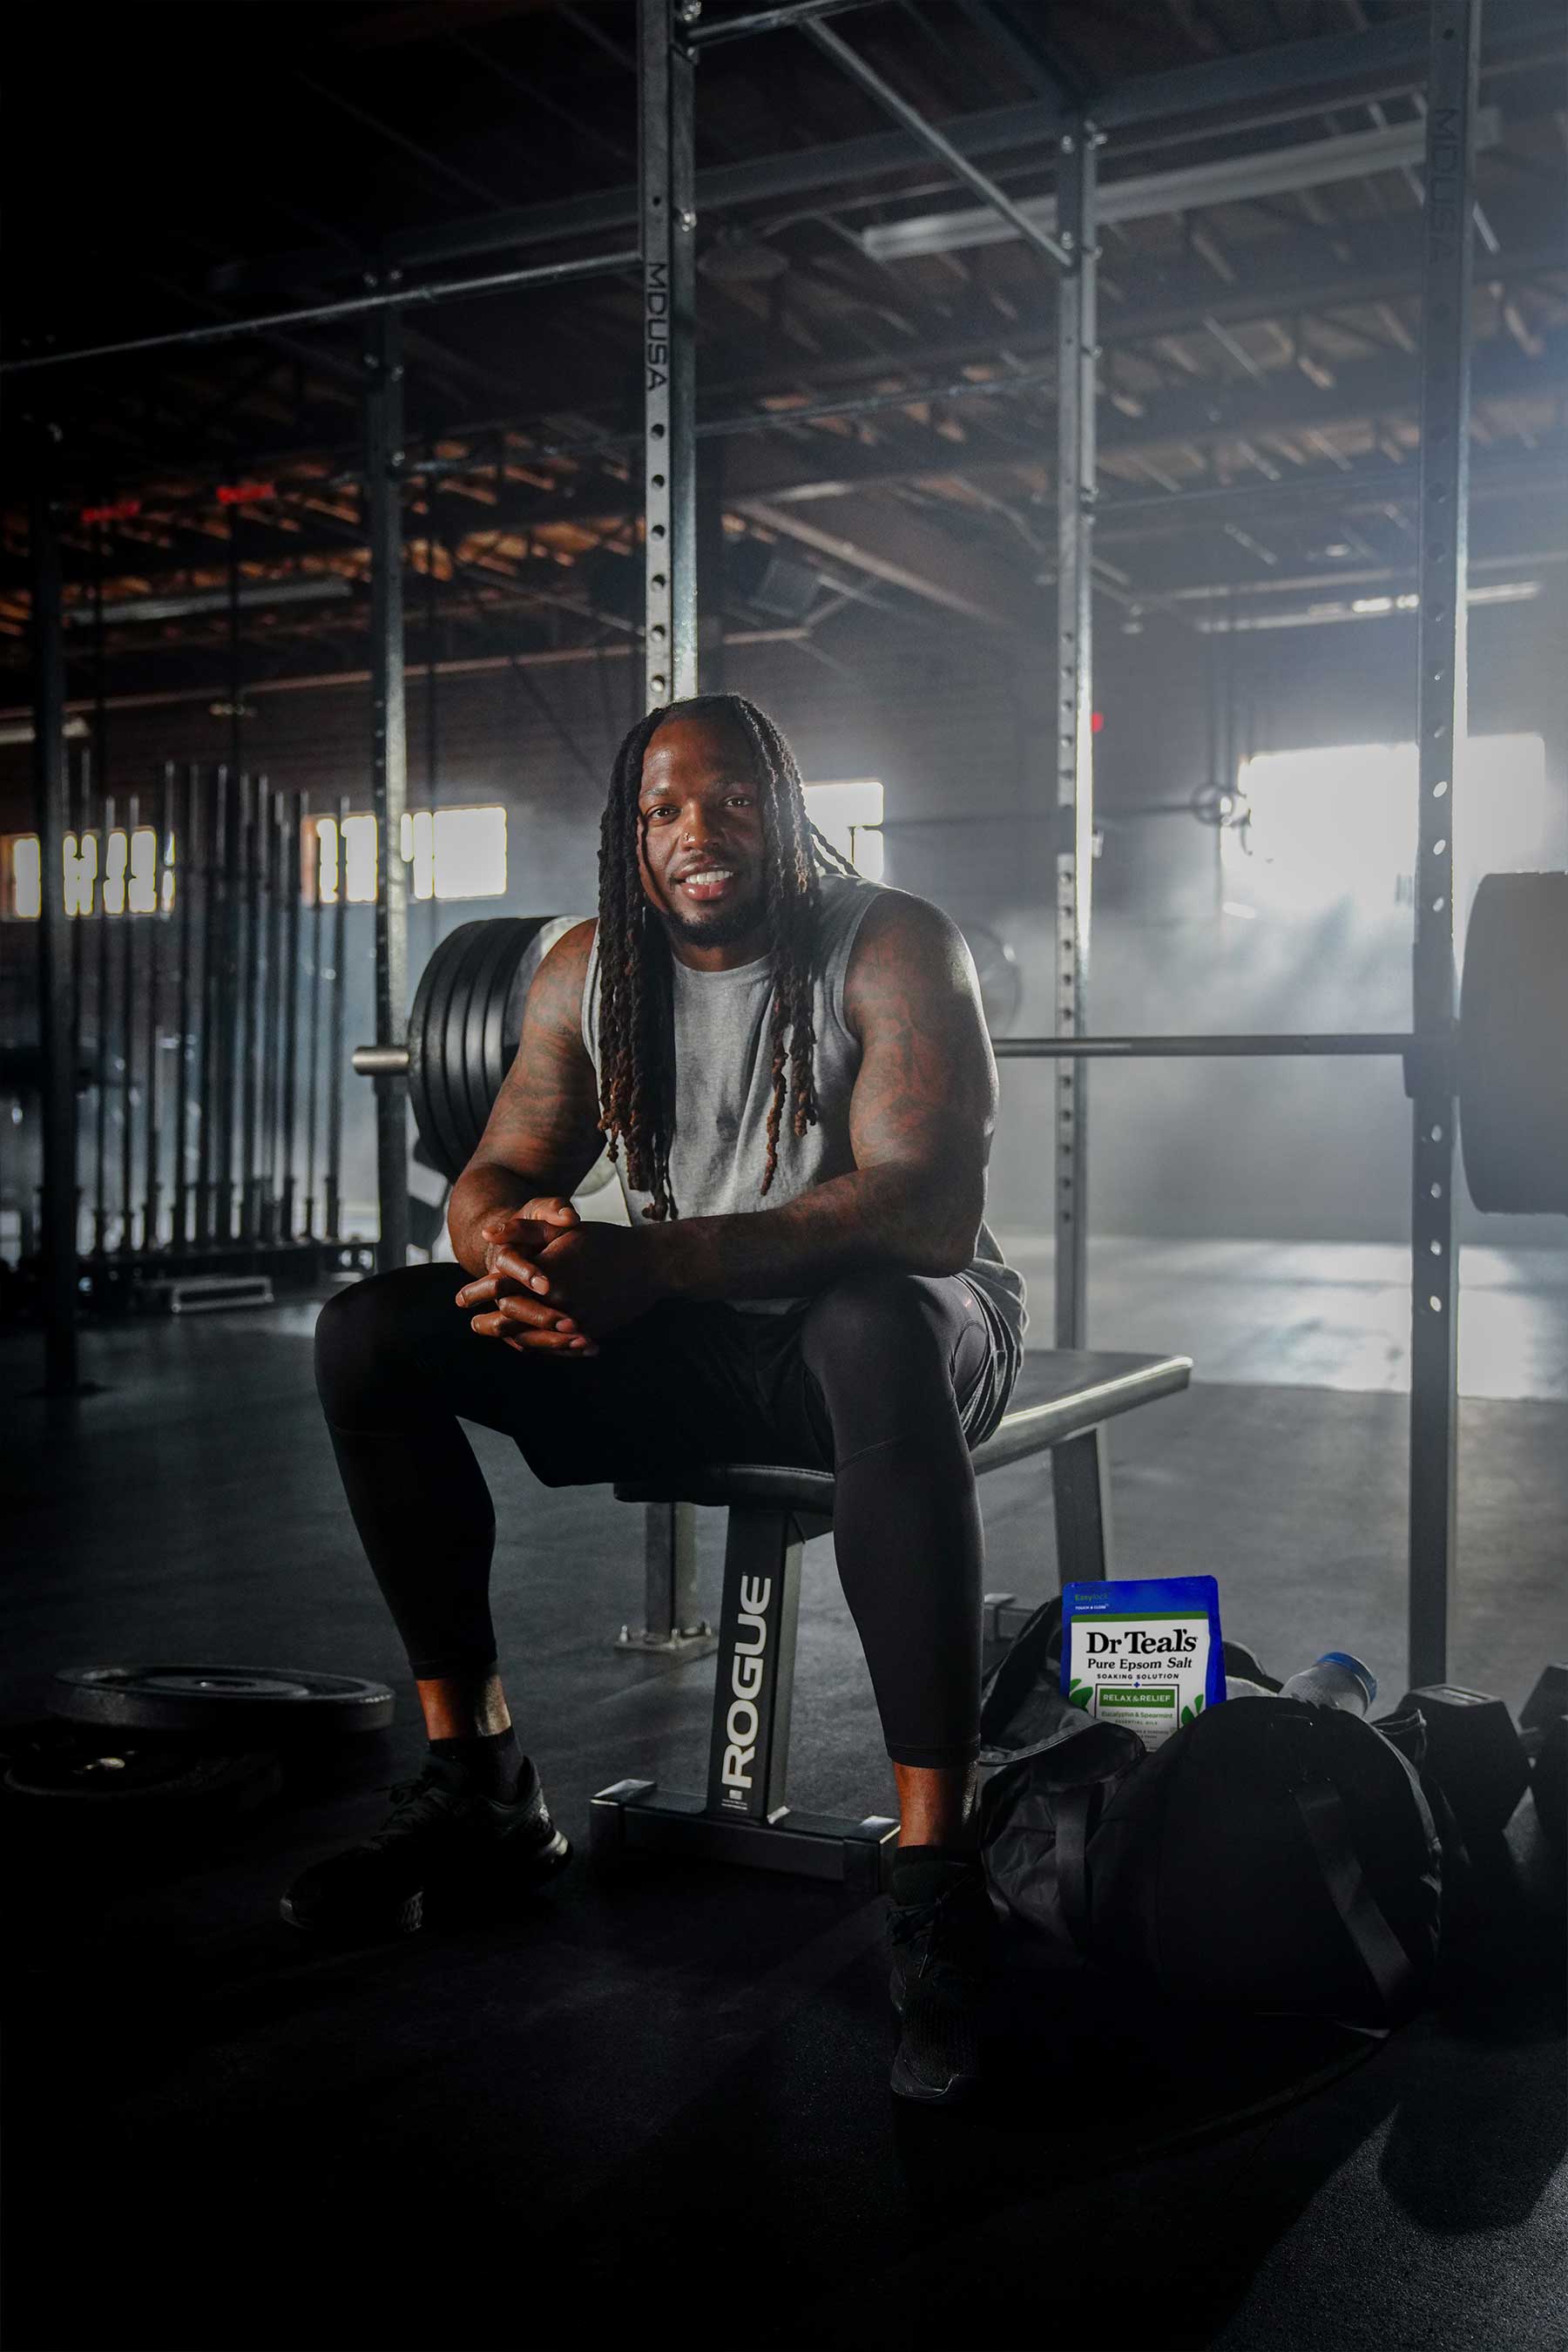 One of the league's best running backs, Derrick Henry has used Dr Teal's throughout his professional career to help him recover and stay on the field.